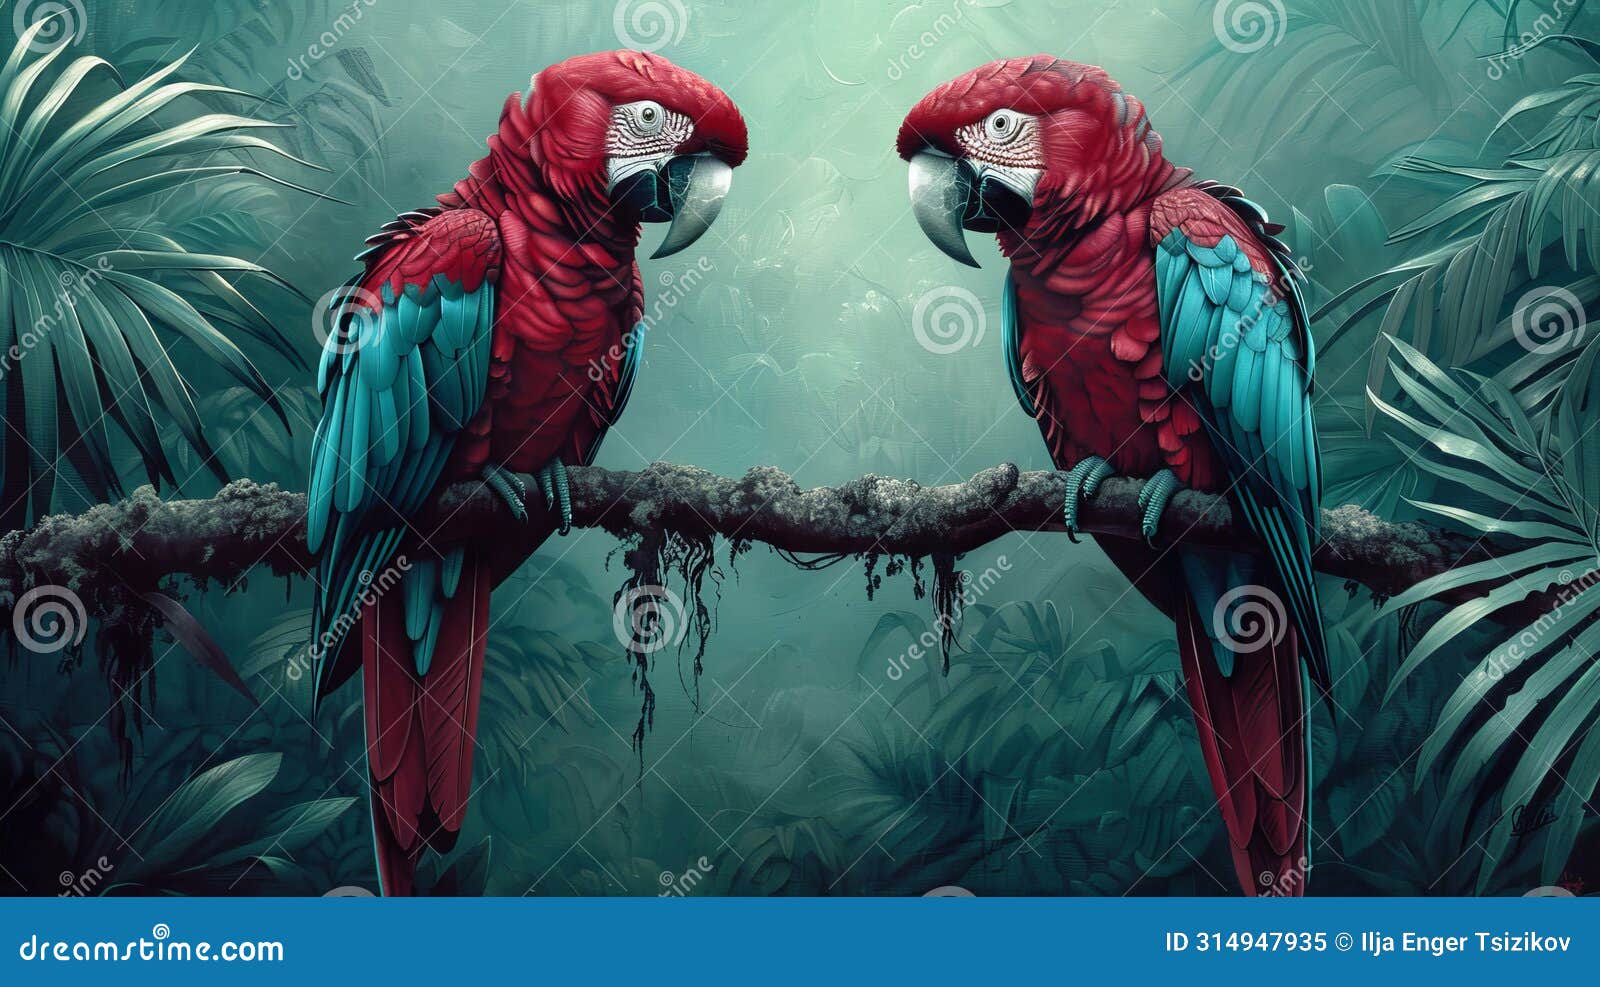 lively parrots animating the verdant canopy with their colorful feathers and cheerful chatter